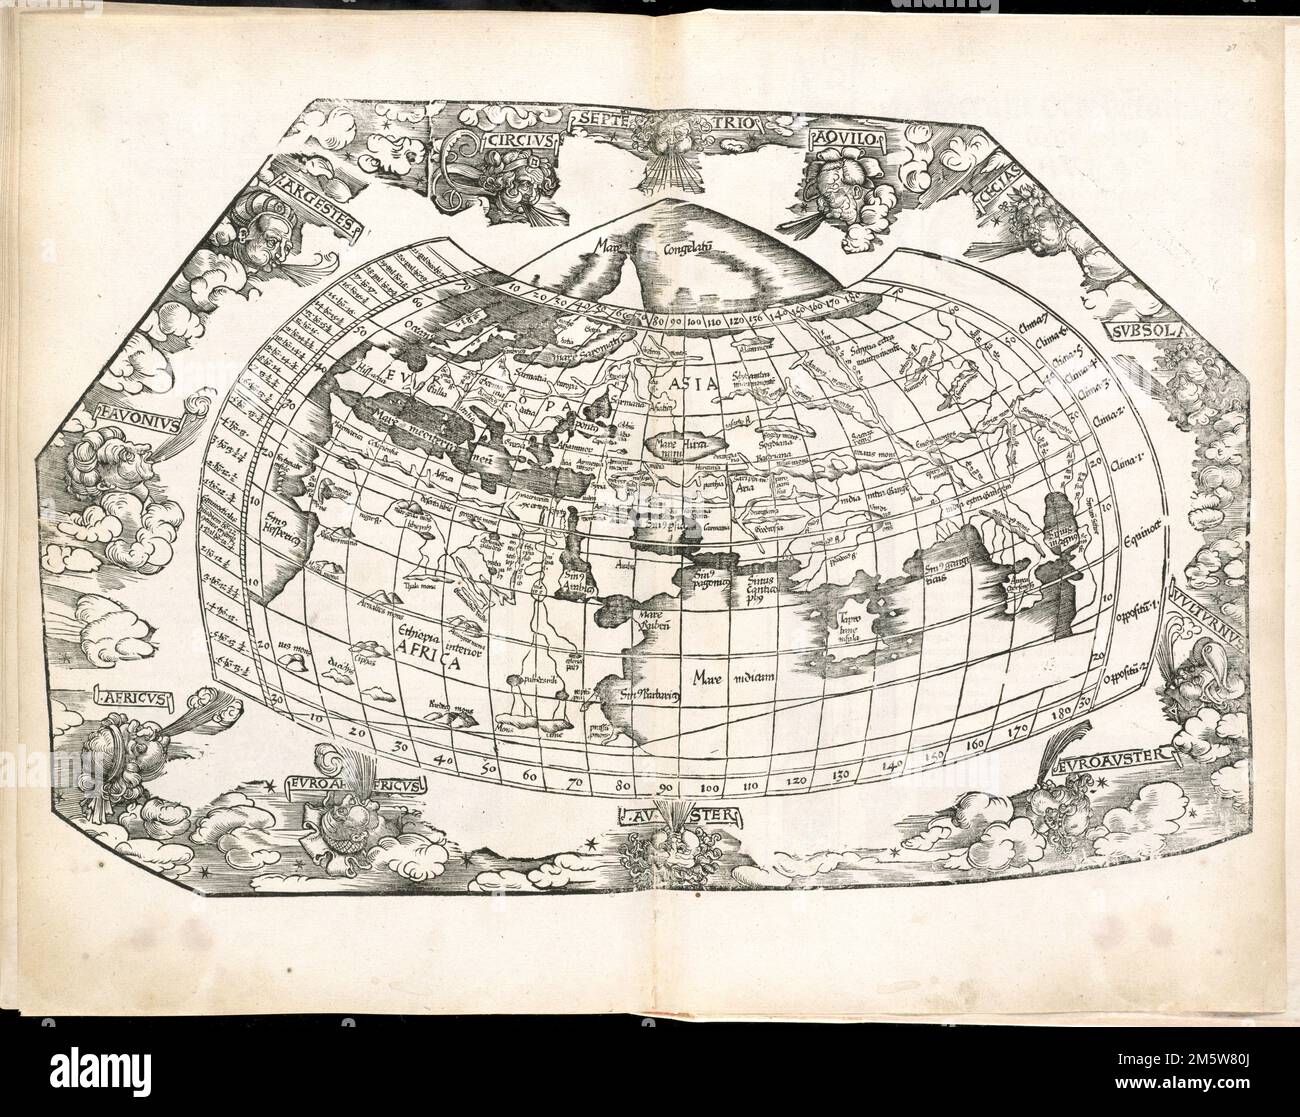 [The World]. Map of the eastern hemisphere showing Europe, western Asia, and northern Africa. Waldseemüller's Ptolemaic map of 1513, redrawn and reduced in this publication by Laurent Fries. Relief shown pictorially. Includes names of places and natural features. Map border shows decorative windheads. Includes climatic and latitudinal notes. Appears in the author's Geographia, translated by Willibald Pirckheimer, with annotations by Joannes Regiomontanus. Argentoragi [i.e. Strasbourg] : Iohannes Grieningerus, communibus Iohannis Koberger impensis excudebat, anno a Christi Natiuitate 1525 tert Stock Photo